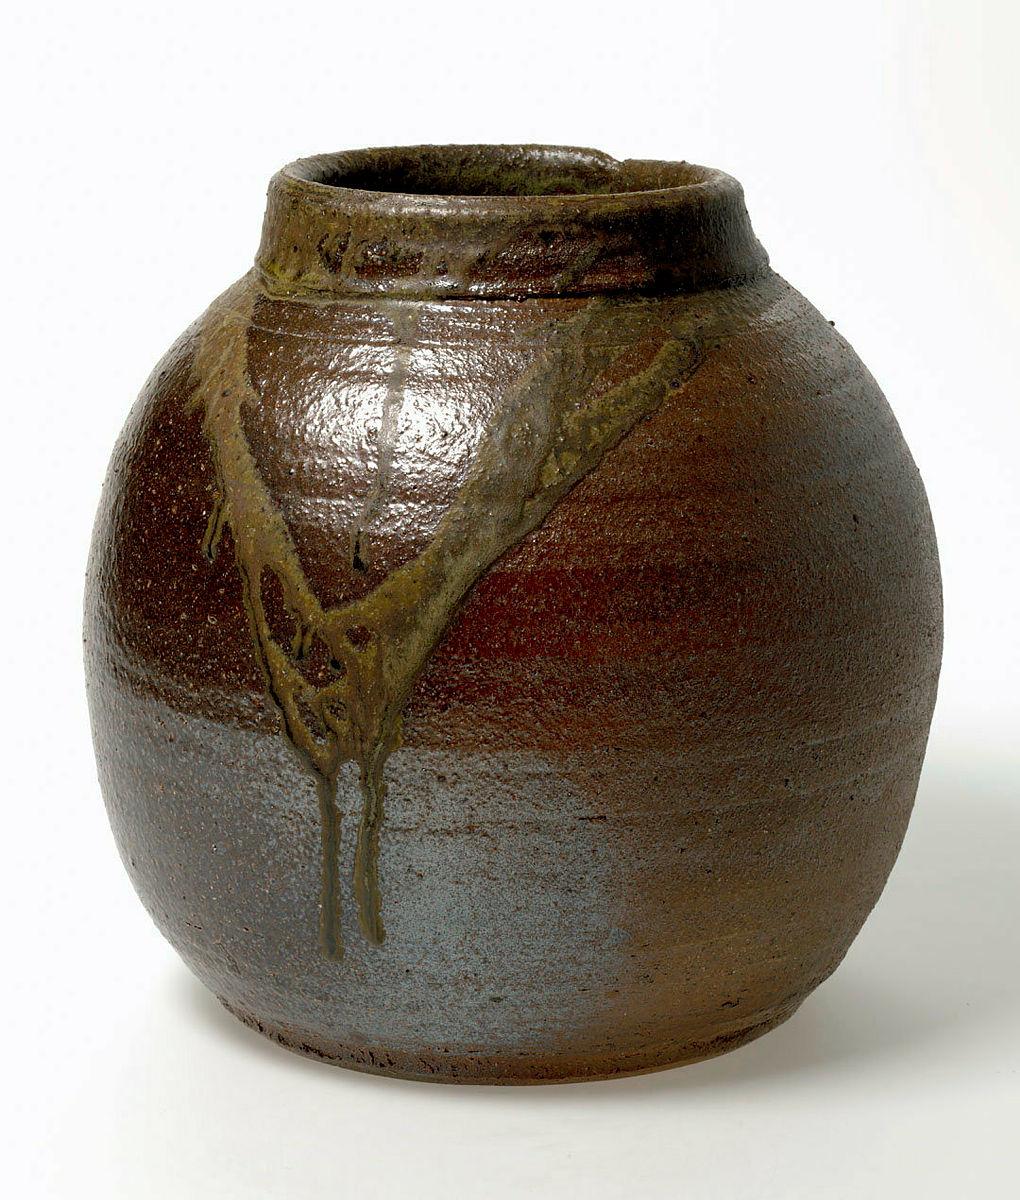 Artwork Jar this artwork made of Stoneware, wheelthrown Golden Grove clay, fired in a gas and wood-fired kiln, created in 1980-01-01